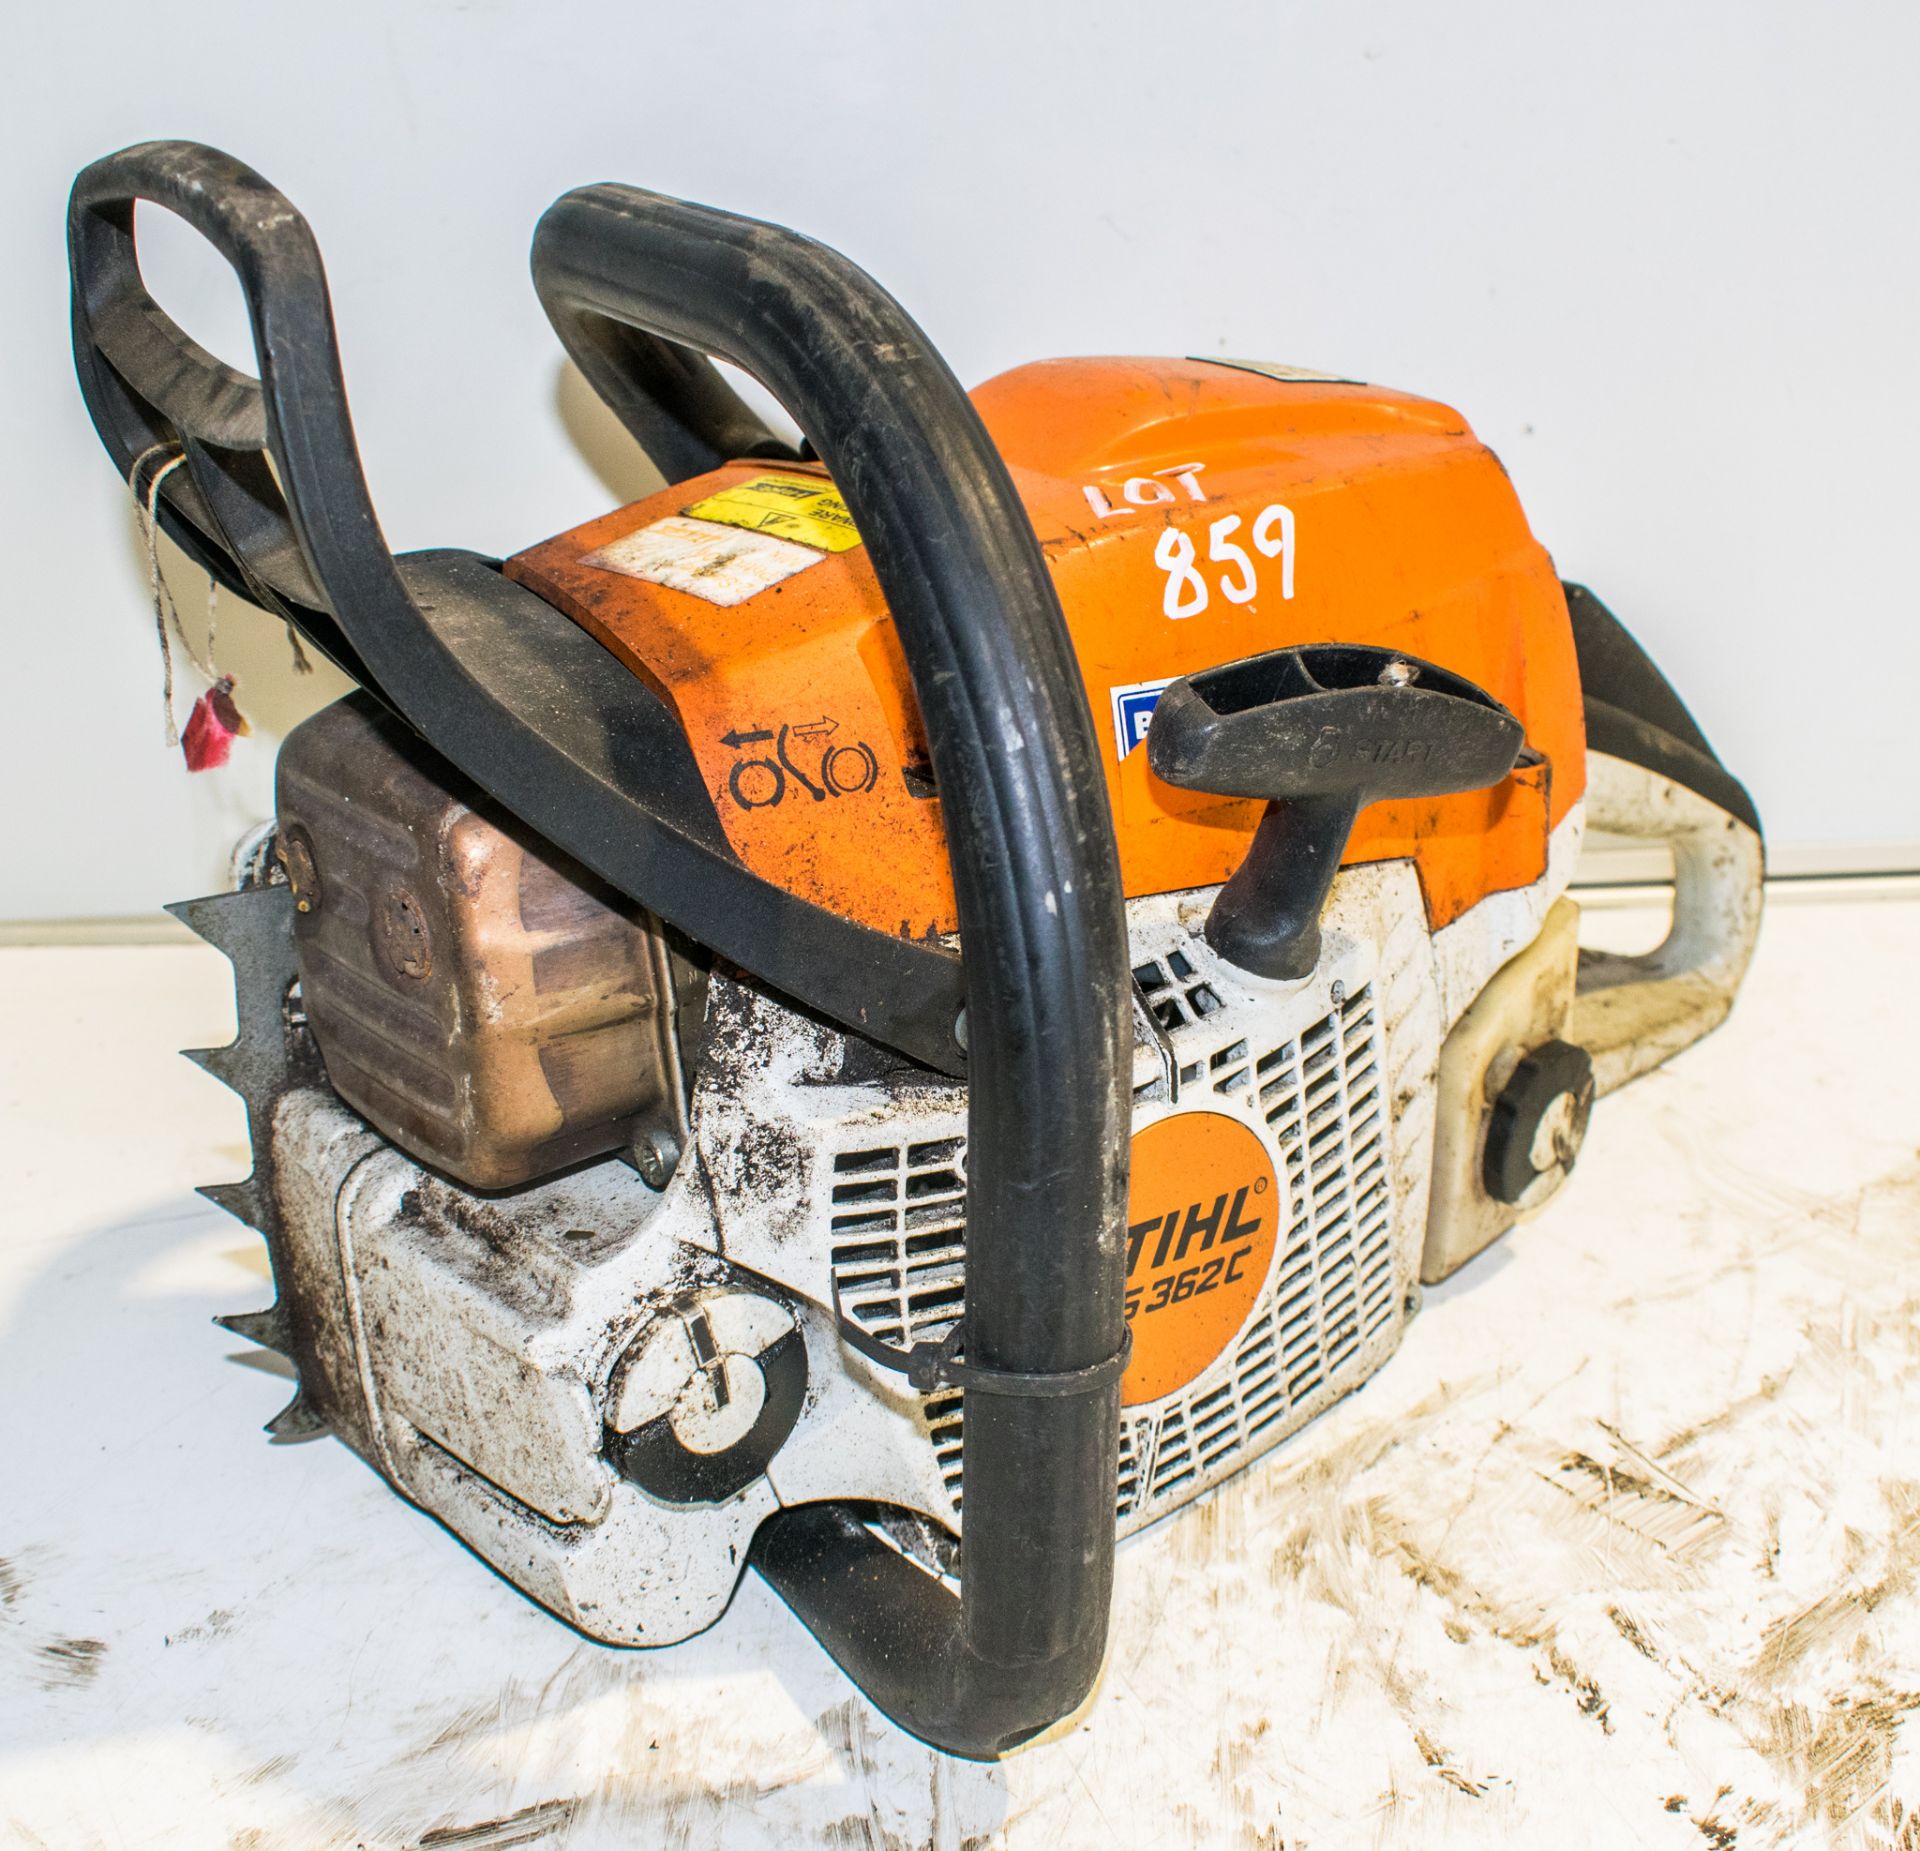 Stihl MS362C petrol driven chainsaw ** Parts missing **